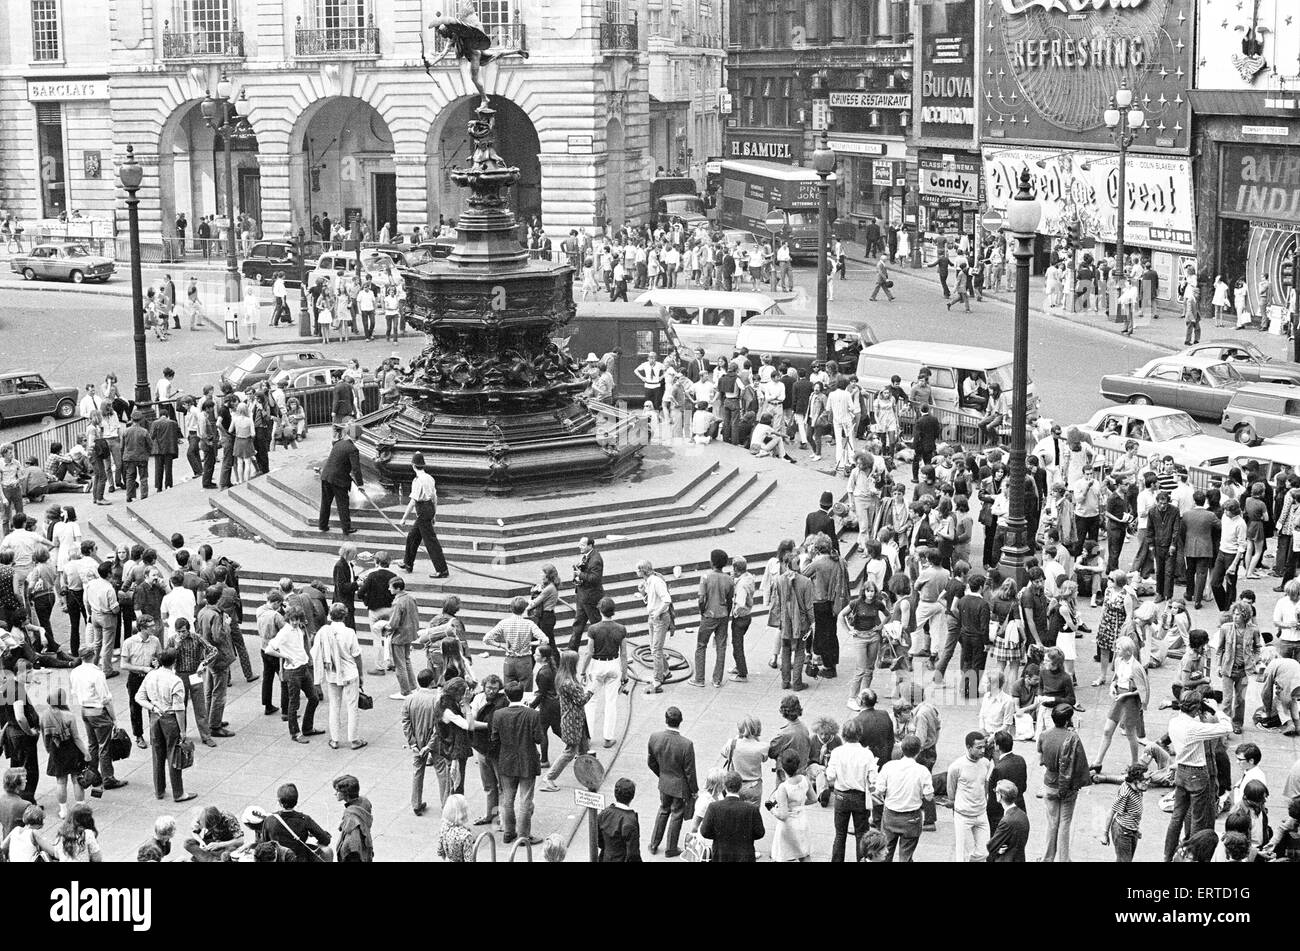 Tourists in Piccadilly, London, 10th August 1969. Stock Photo